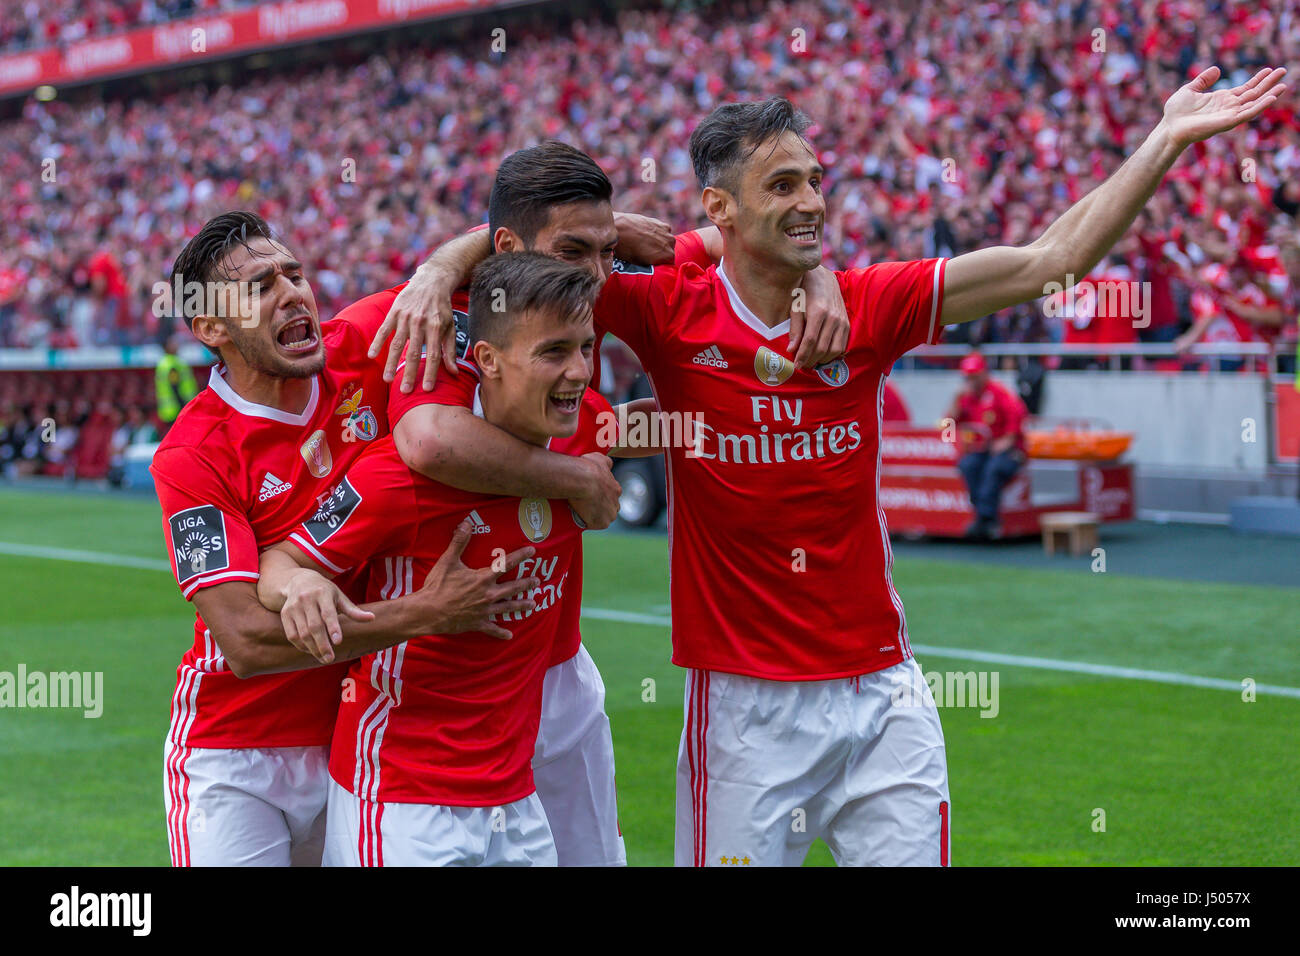 Lisbon, Portugal. 13th May, 2017. May 13, 2017. Lisbon, Portugal. Benfica's forward from Argentina Franco Cervi (22) celebrating after scoring a goal with Benfica's forward from Mexico Raul Jimenez (9), Benfica's forward from Brazil Jonas (10) and Benfica's forward from Argentina Toto Salvio (18) during the game SL Benfica v Vitoria SC Credit: Alexandre de Sousa/Alamy Live News Stock Photo